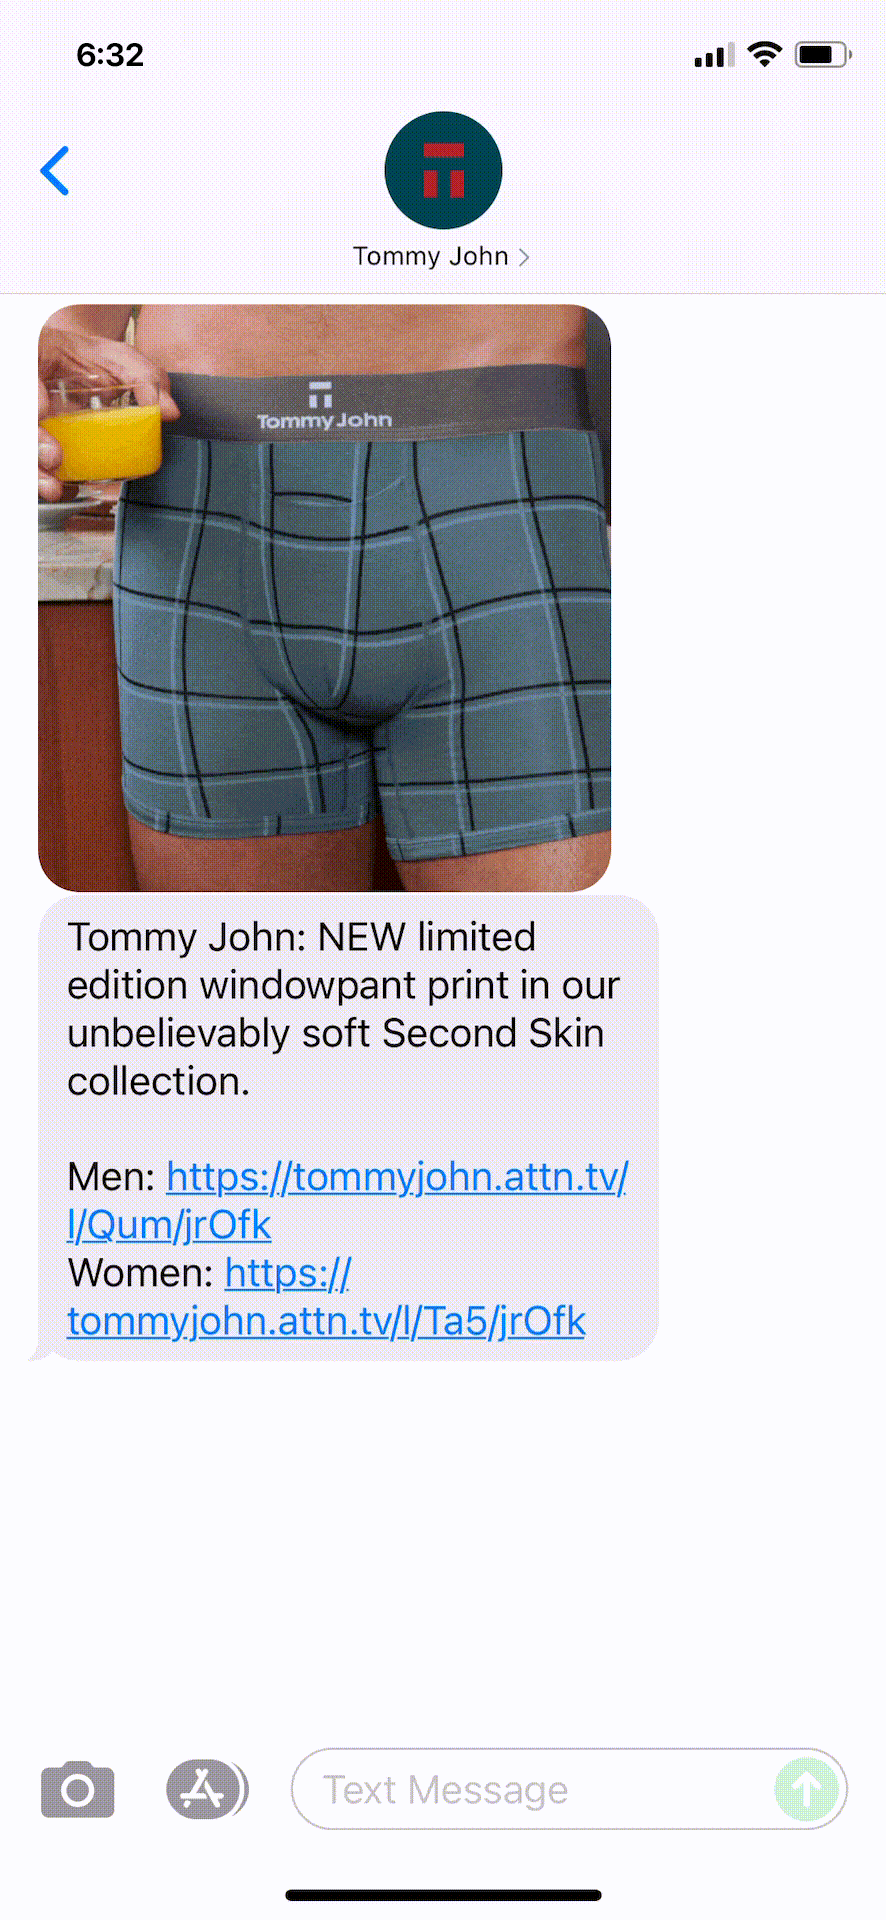 Tommy-John-Text-Message-Marketing-Example-08.01.2021